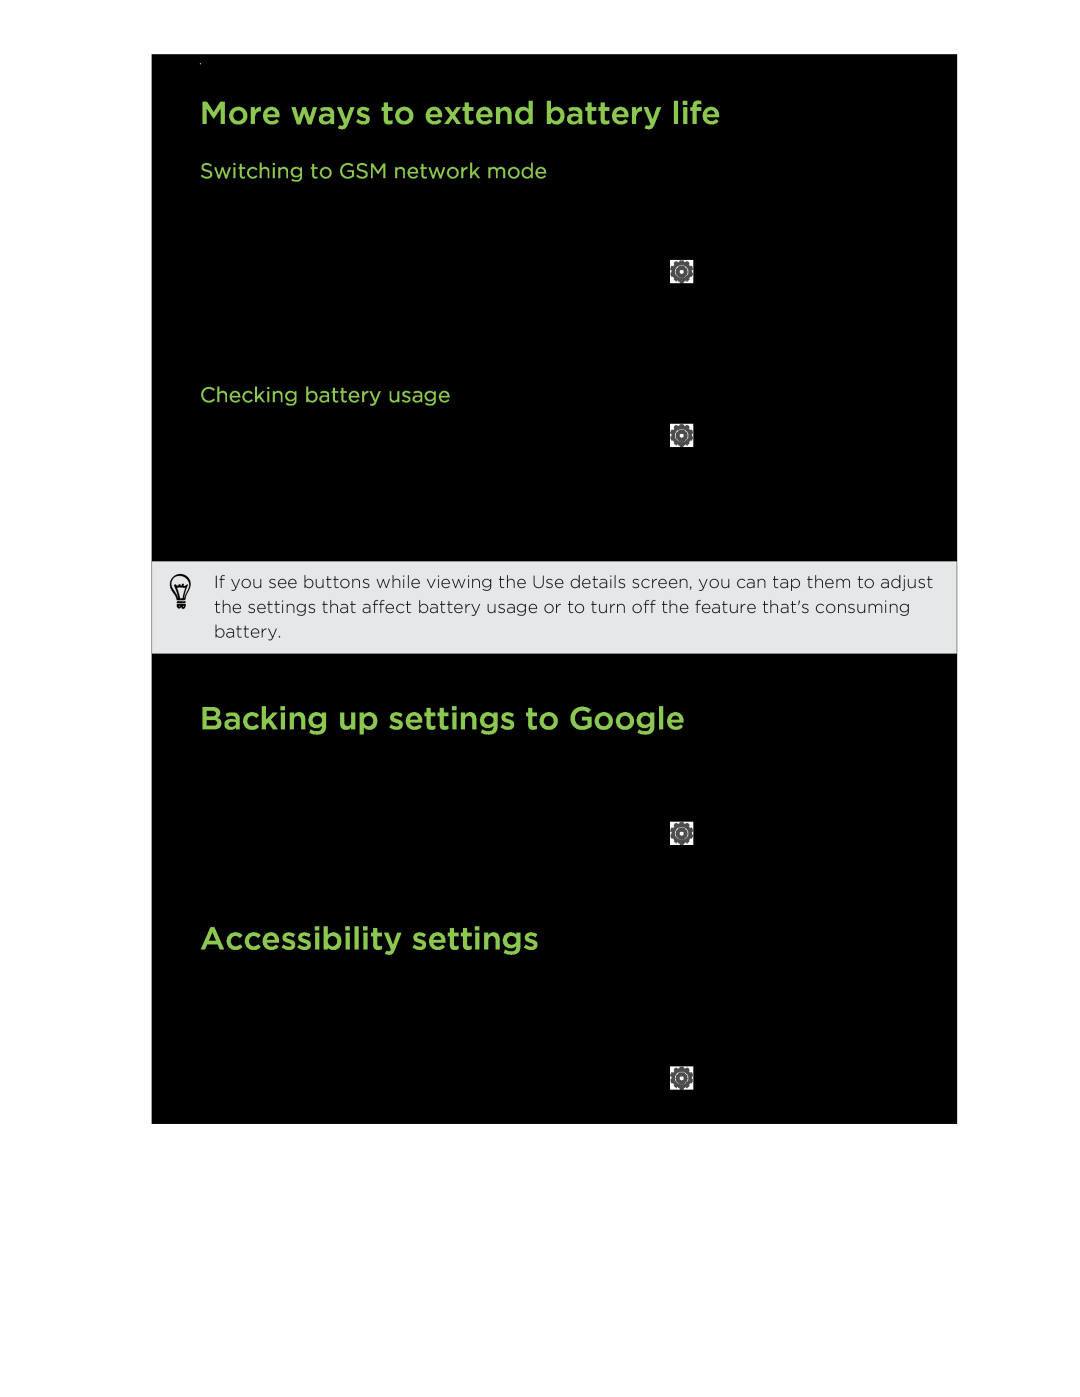 HTC C3HTCONEV4GBUNLOCKEDBLACK More ways to extend battery life, Backing up settings to Google, Accessibility settings 